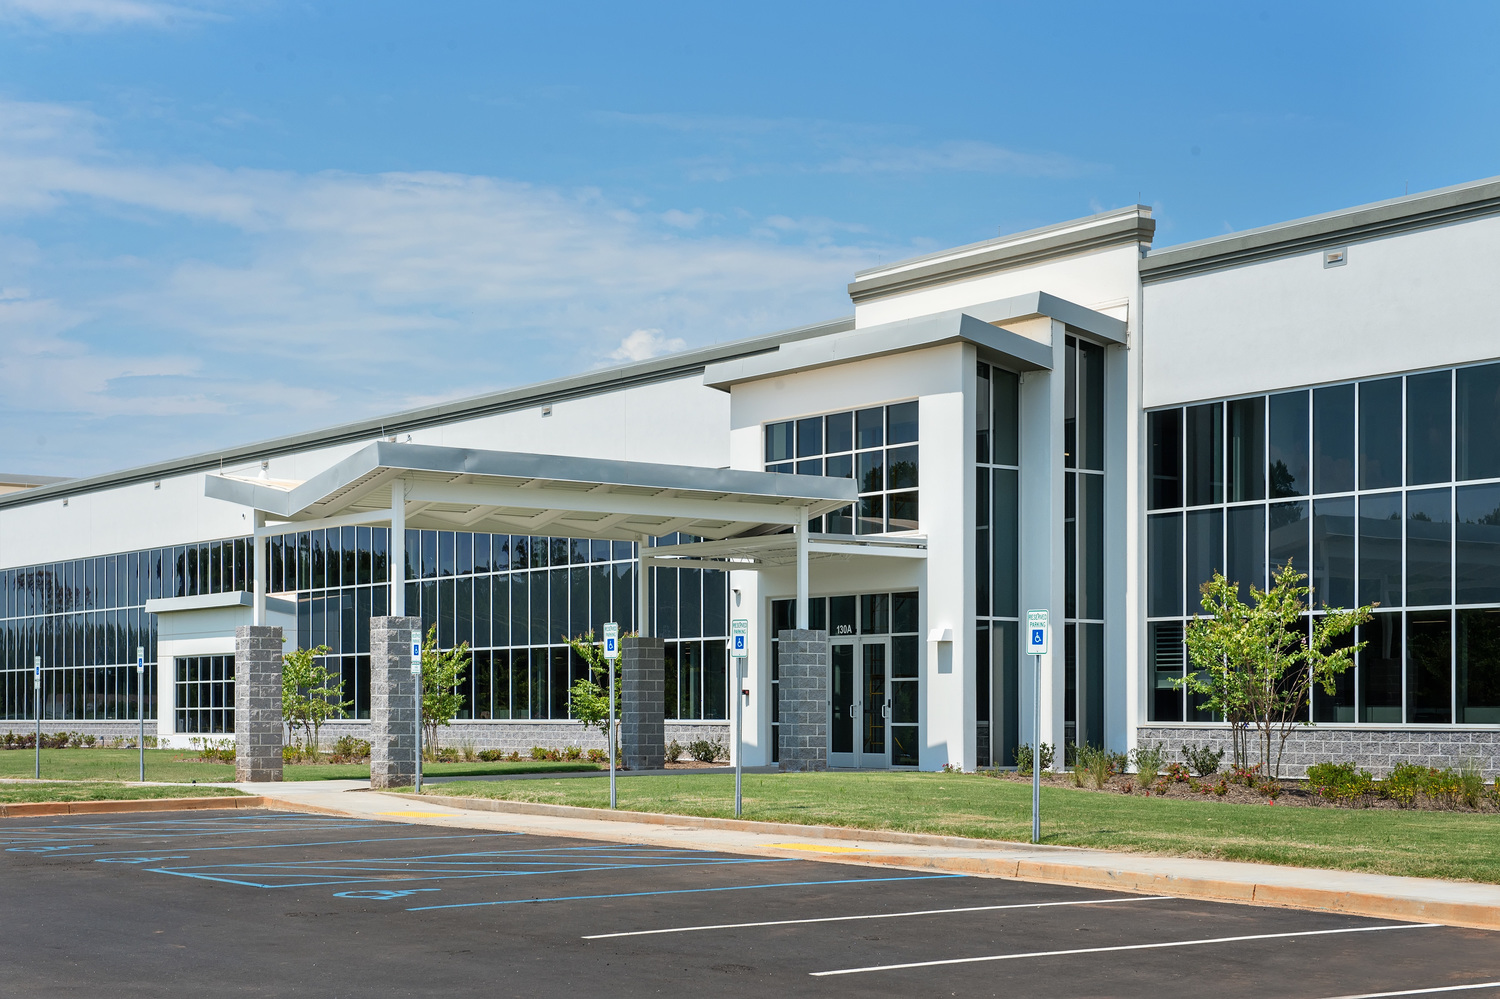 Final photography of Arthrex AMISC Manufacturing and Central Services Facility 